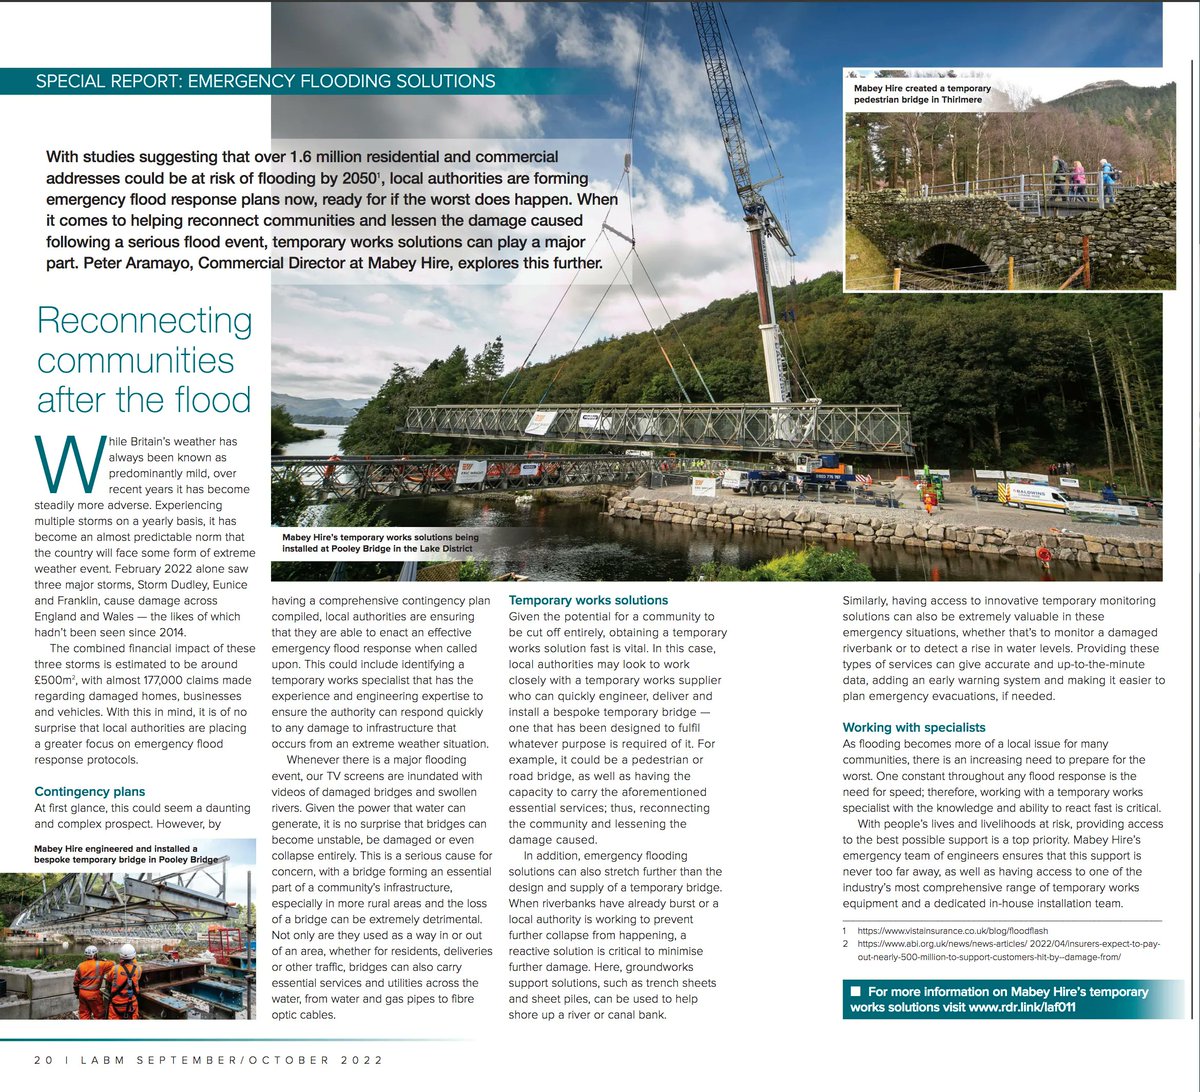 Don't miss our article on page 20 of @LABMmag, in which we explore the role that temporary works solutions can play within a local authority's emergency flood response plans. Visit buff.ly/3DtdePU to read the full article.